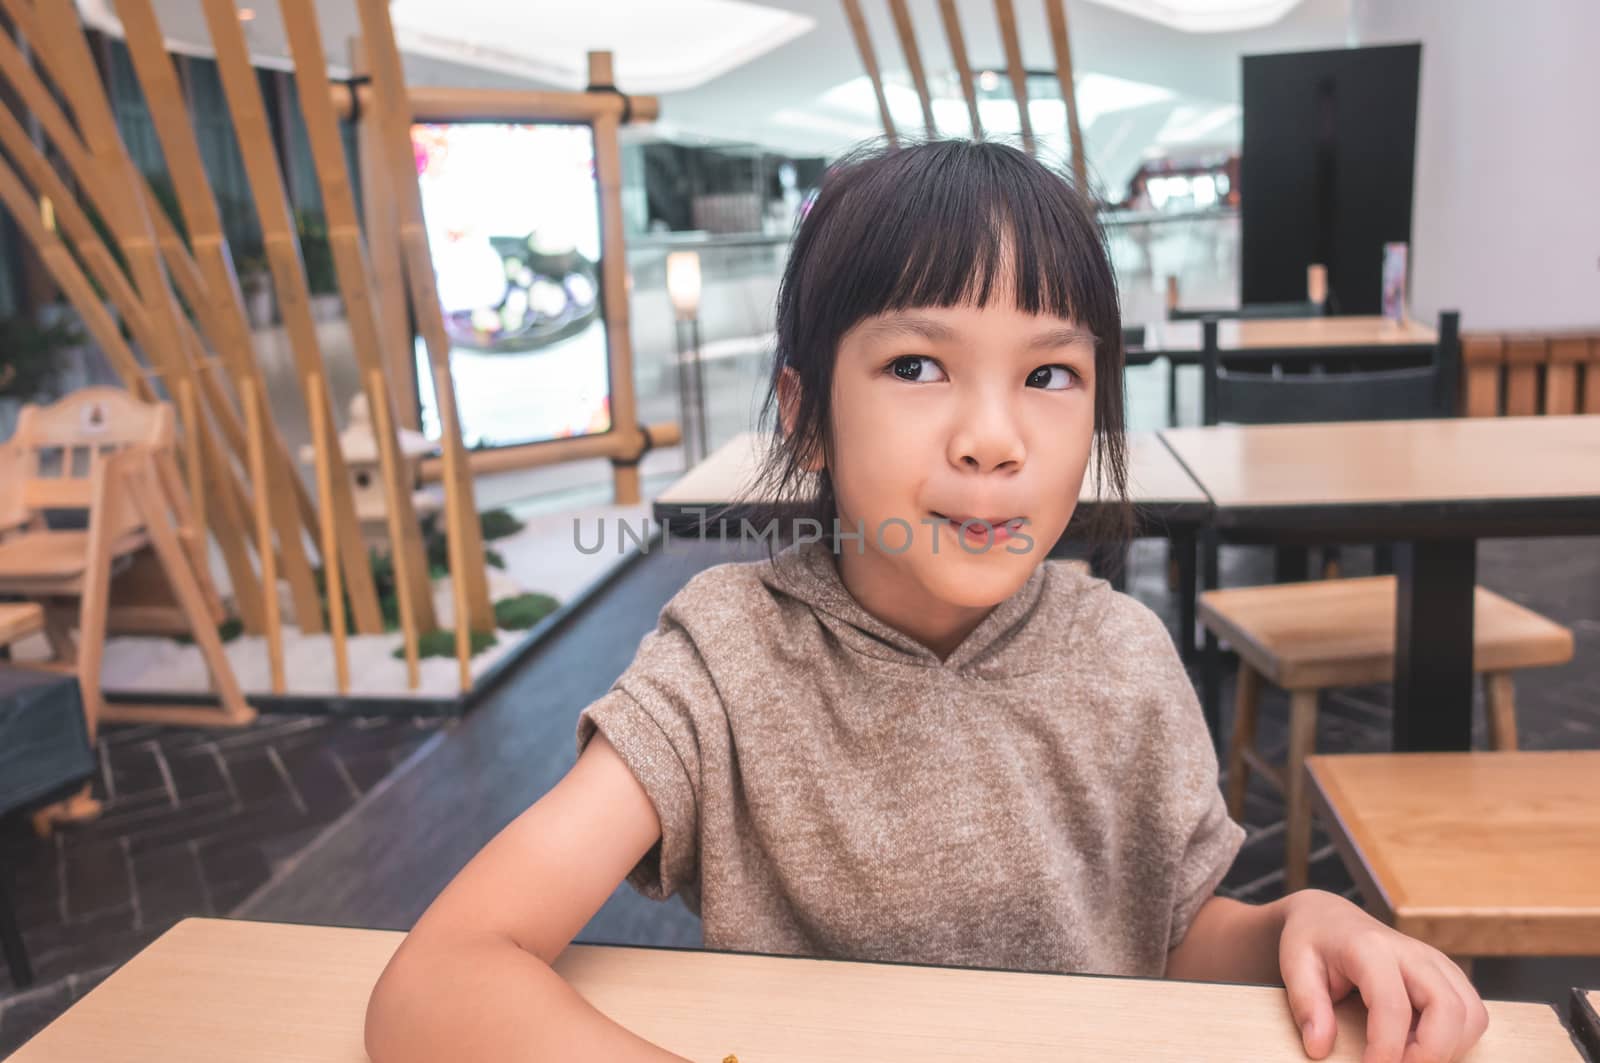 Hungry Funny child licking her lip waiting for food in restaurant.